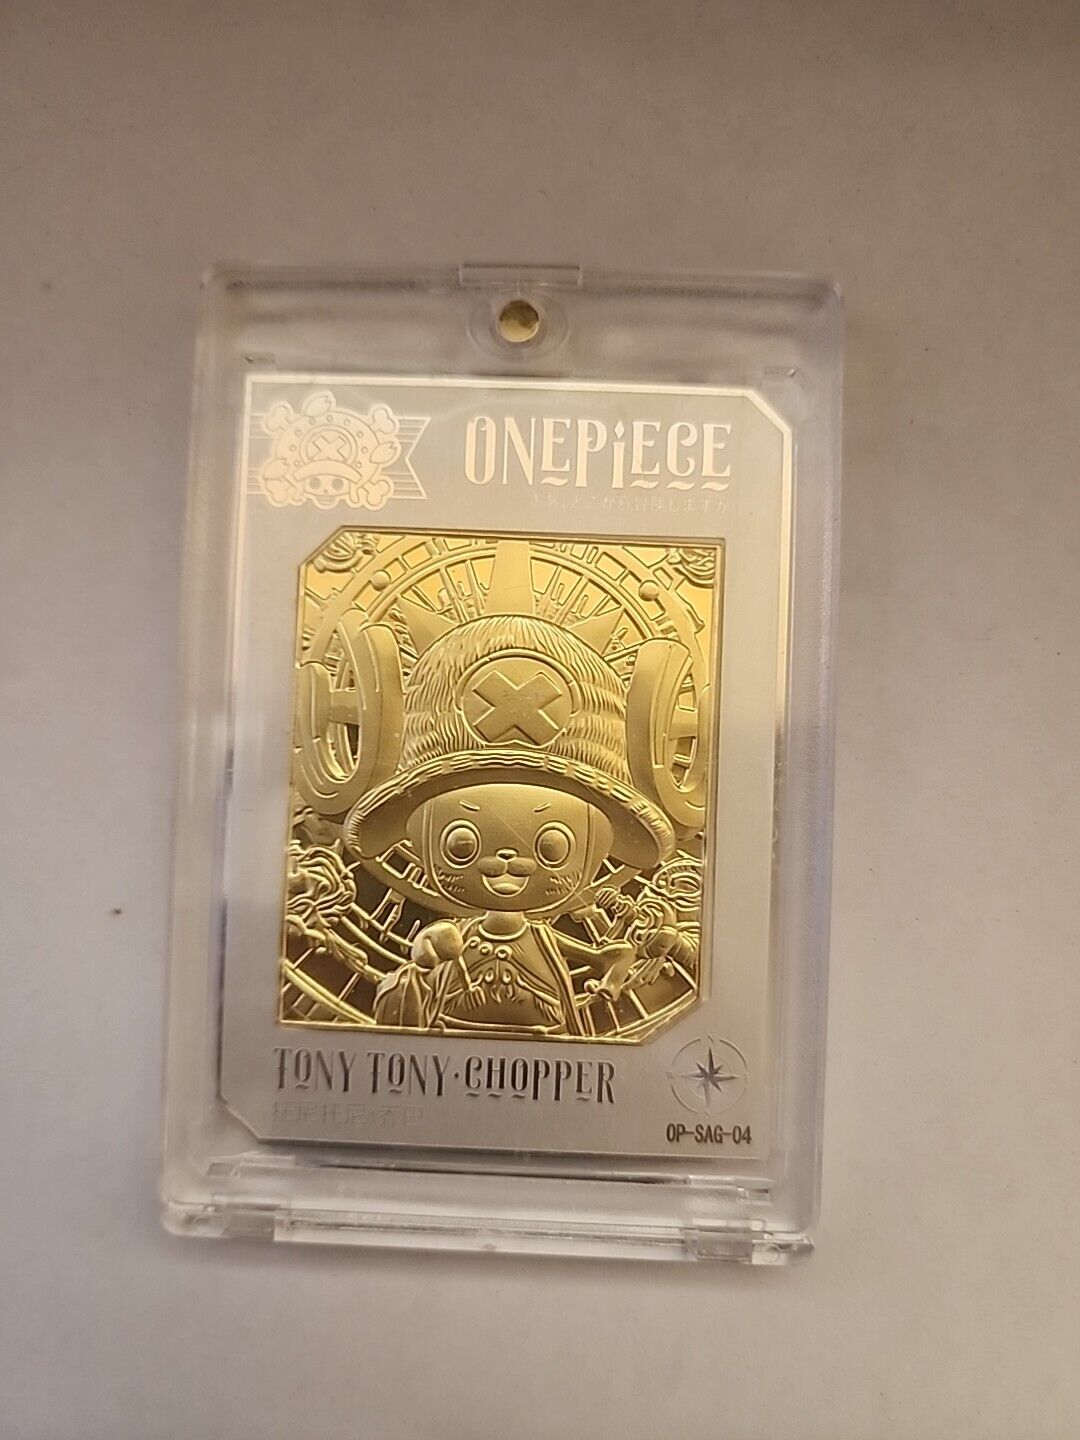 One Piece Endless Treasure 6 OP-SAG-04 Gold Plated Silver Tony Tony Chopper